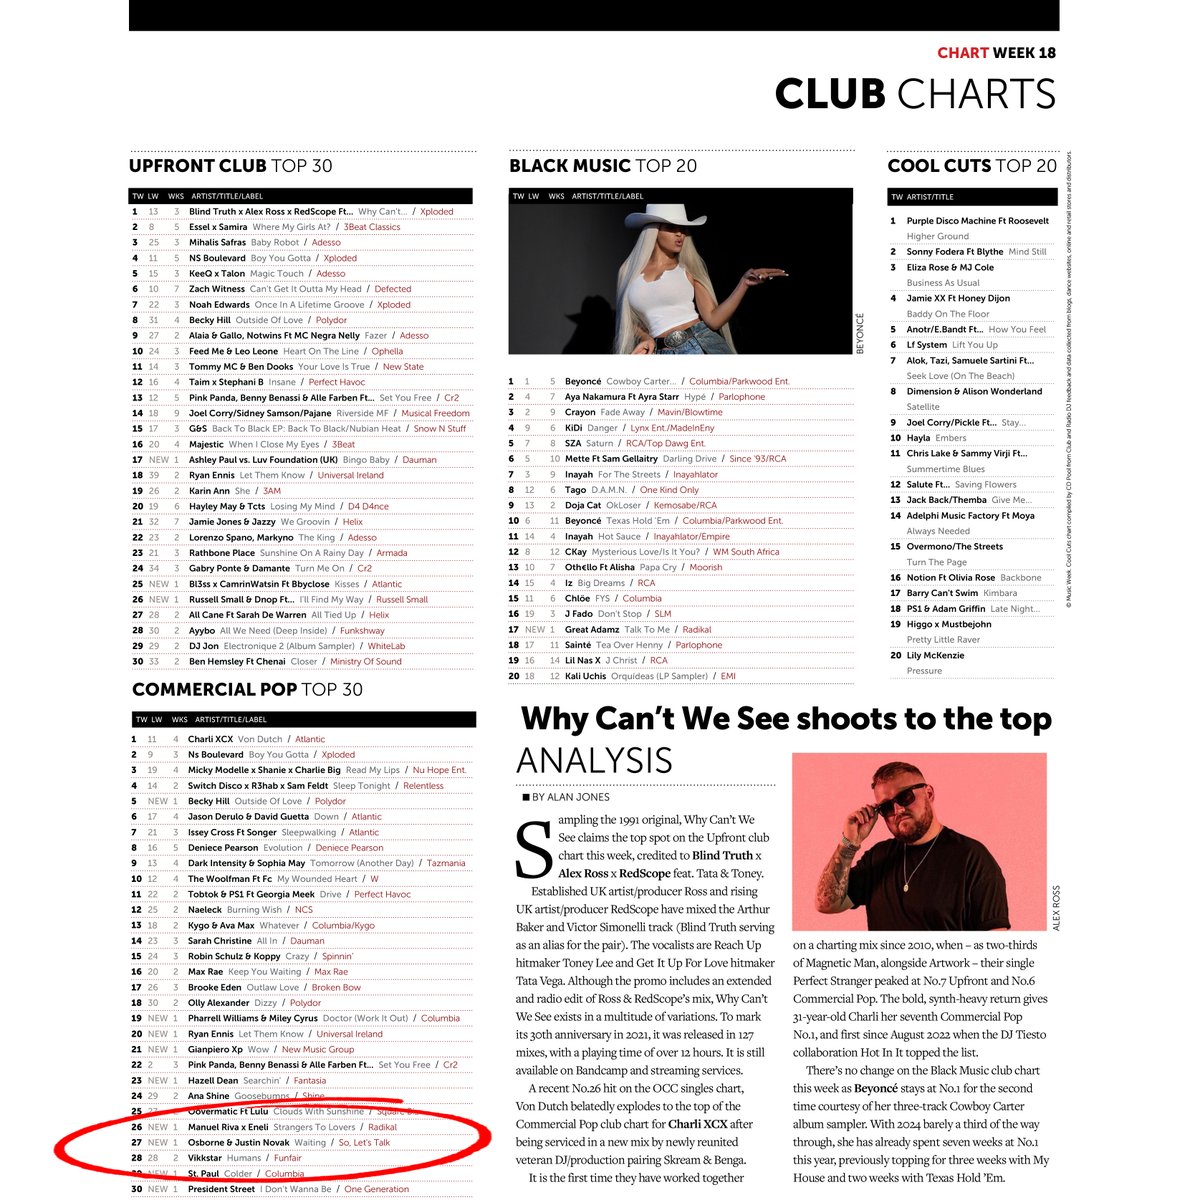 'Waiting' by @osborne_music & @_justinnovak is a new entry at #27 this week on the official @MusicWeek Commercial Pop Club chart.

musicweek.com/charts